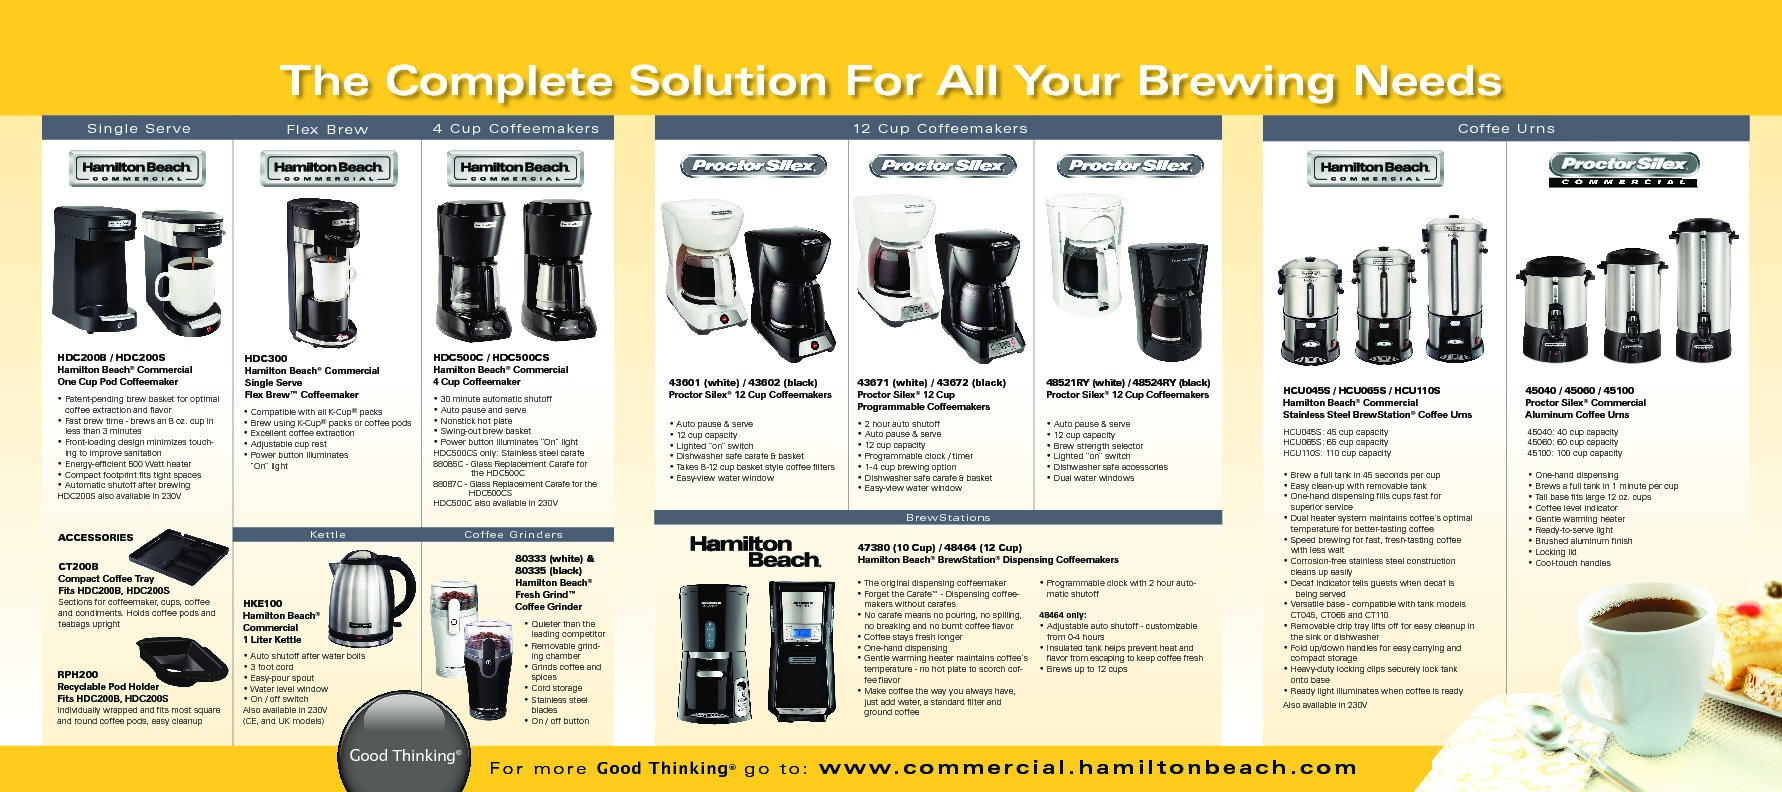 https://hamiltonbeachcommercial.com/wp-content/uploads/2018/09/Which-Brewer-is-right-for-you_-pdf-image.jpg